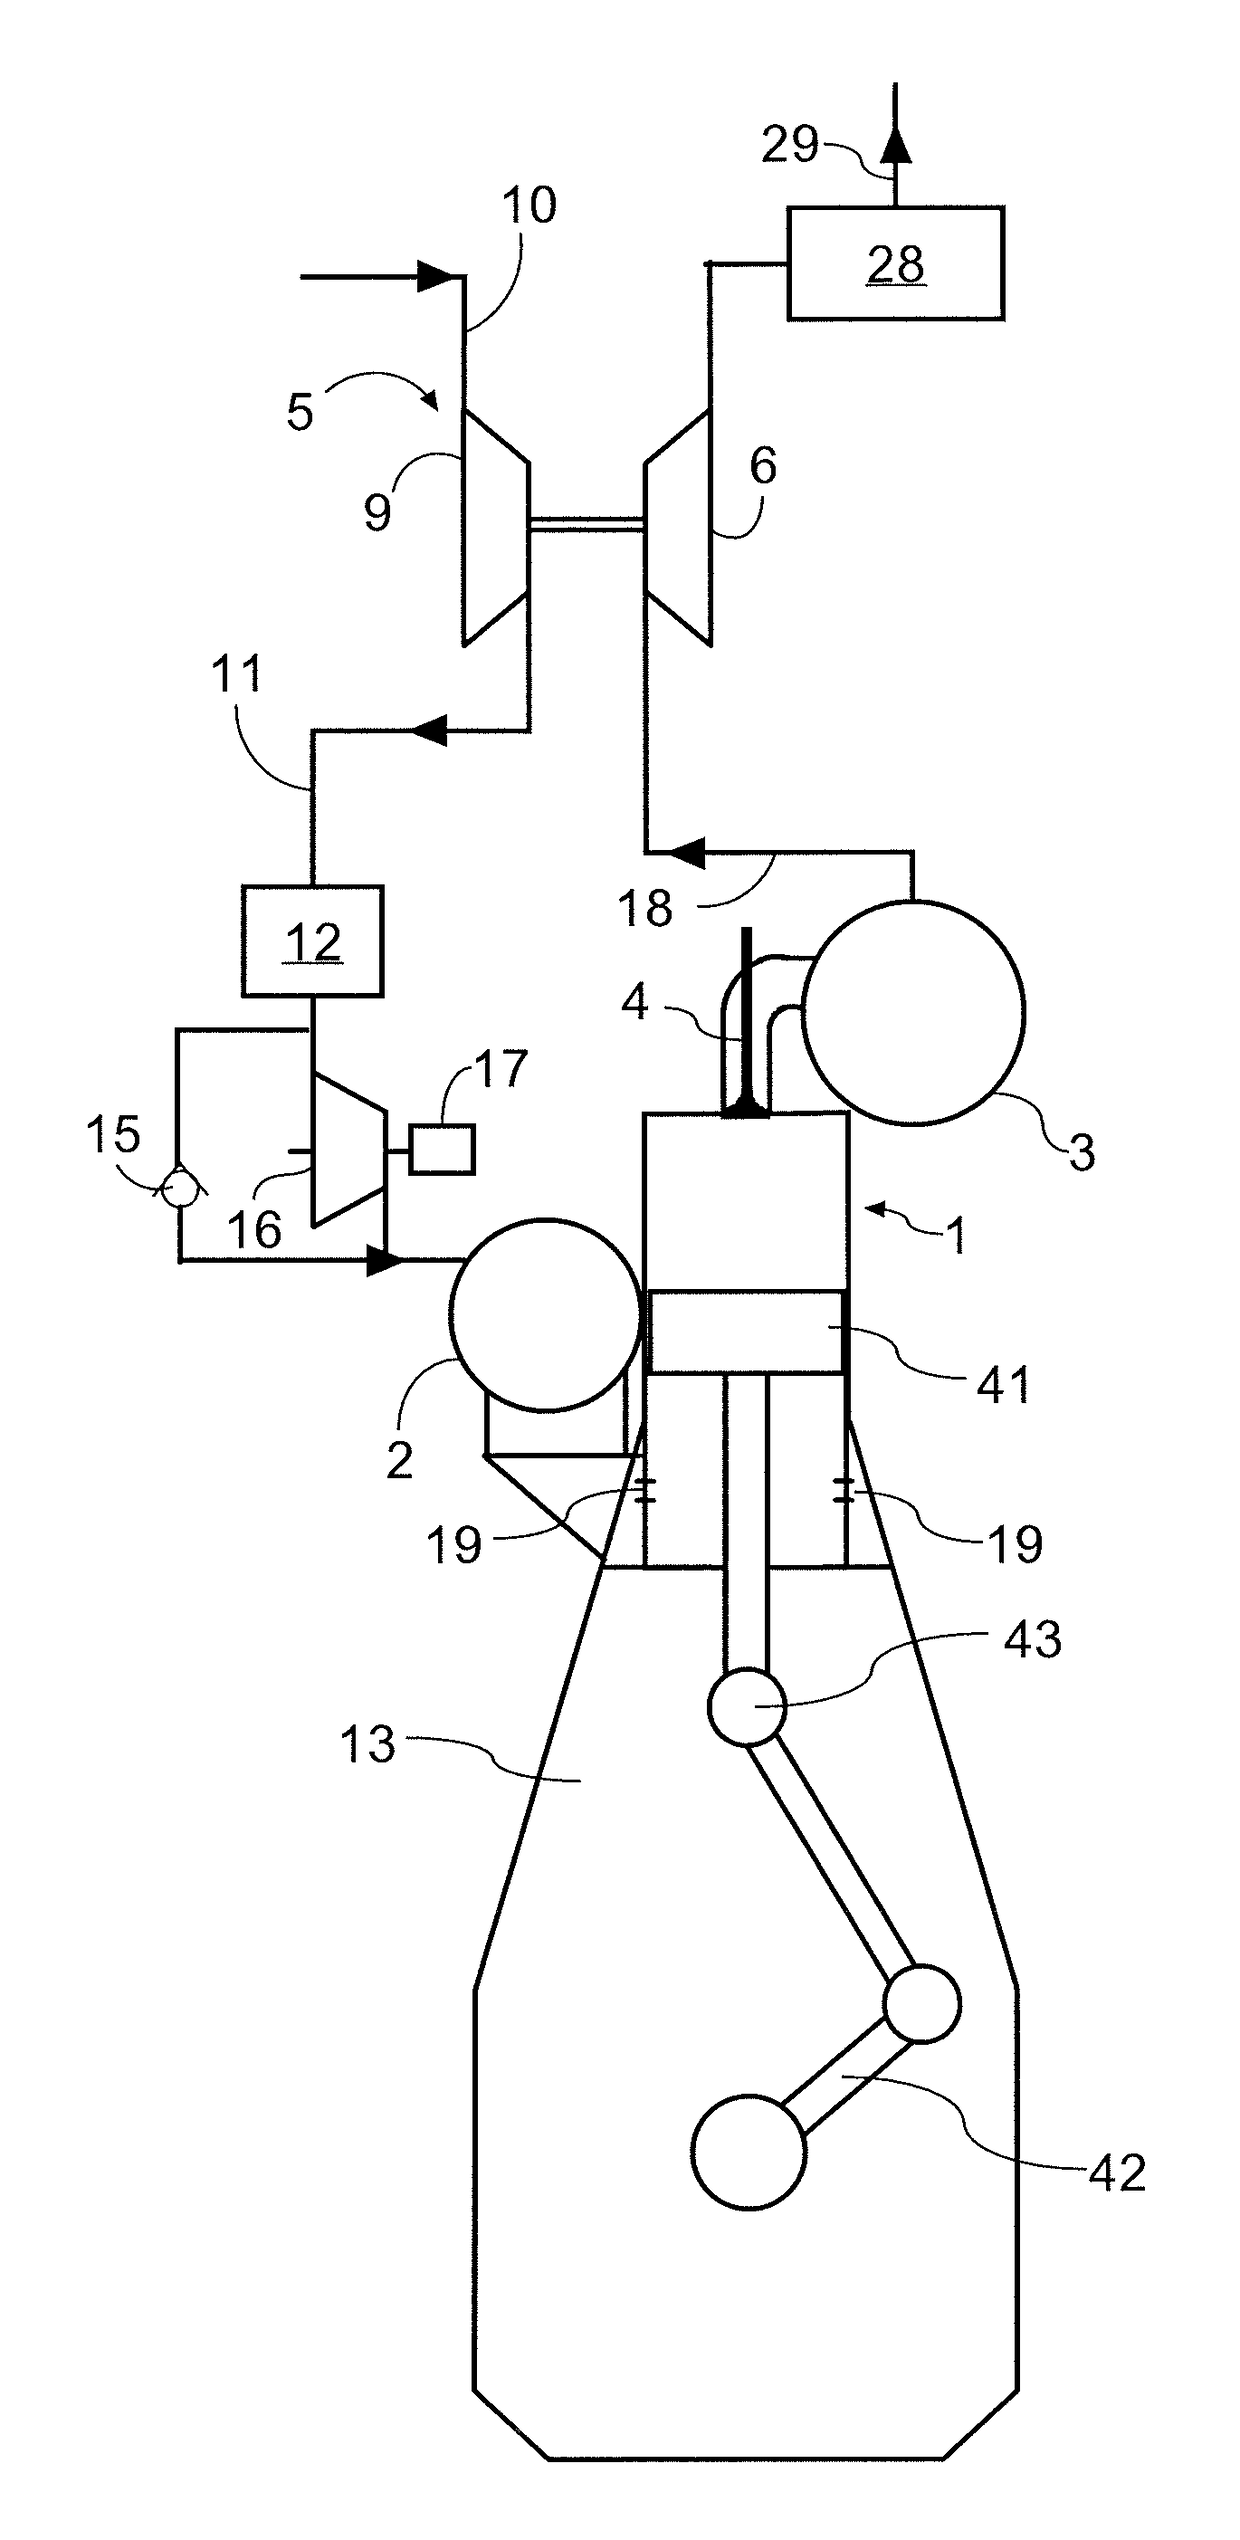 Fuel valve for injecting gaseous fuel into a combustion chamber of a self-igniting internal combustion engine, engine, method and use